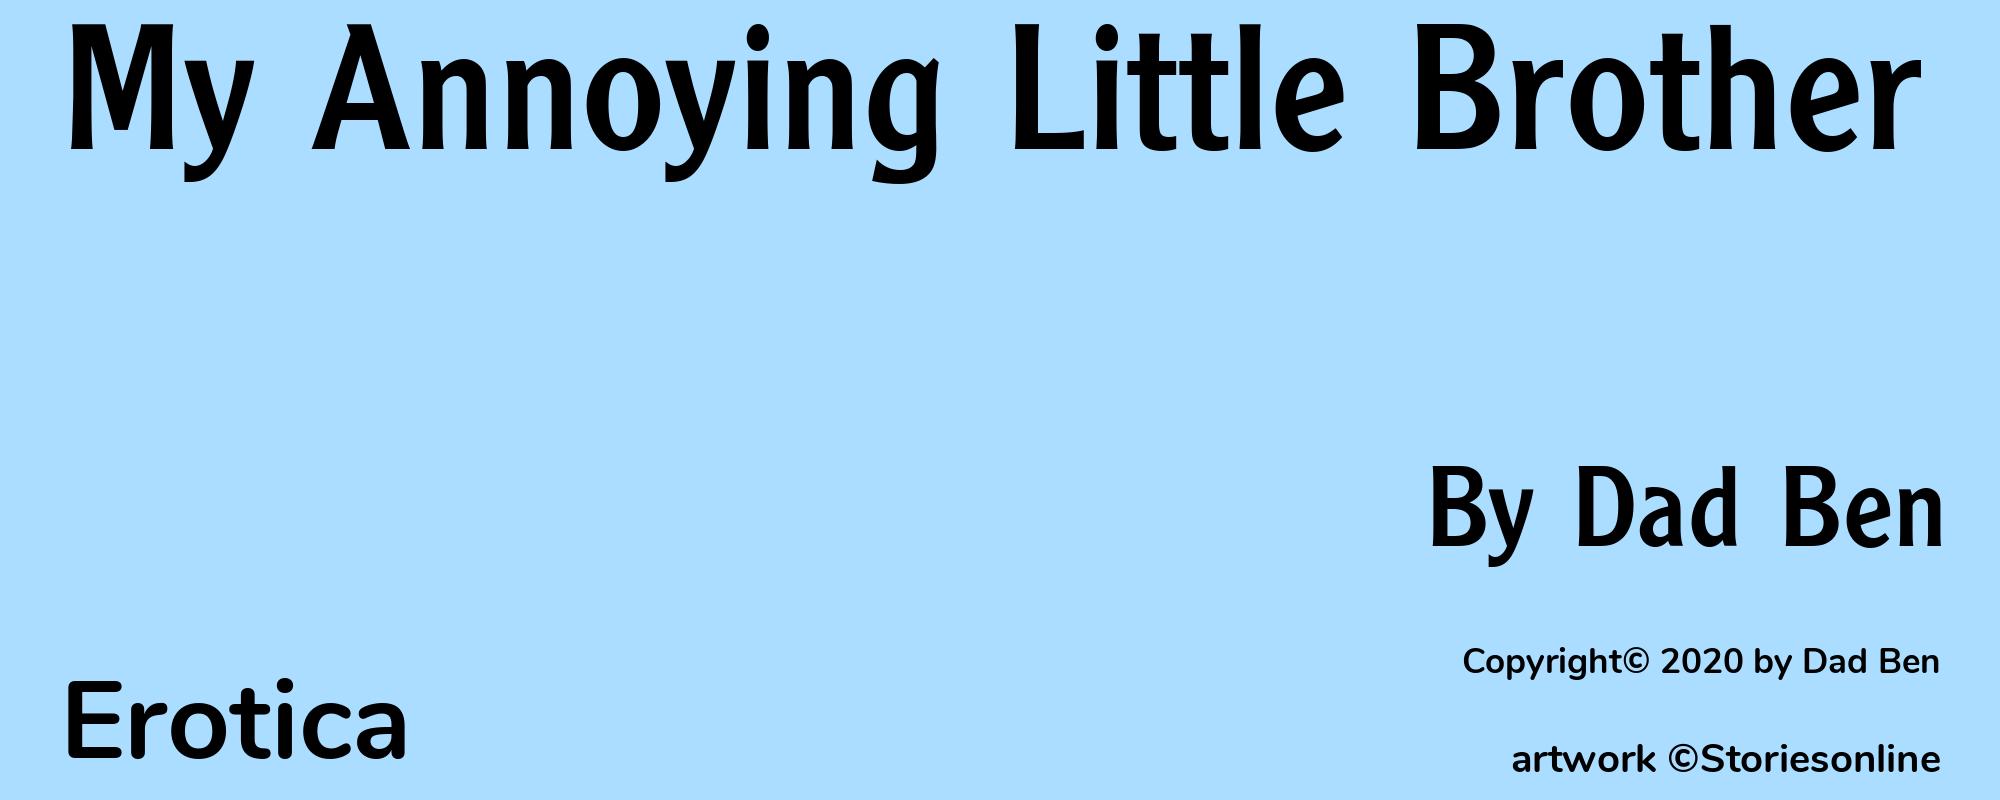 My Annoying Little Brother - Cover